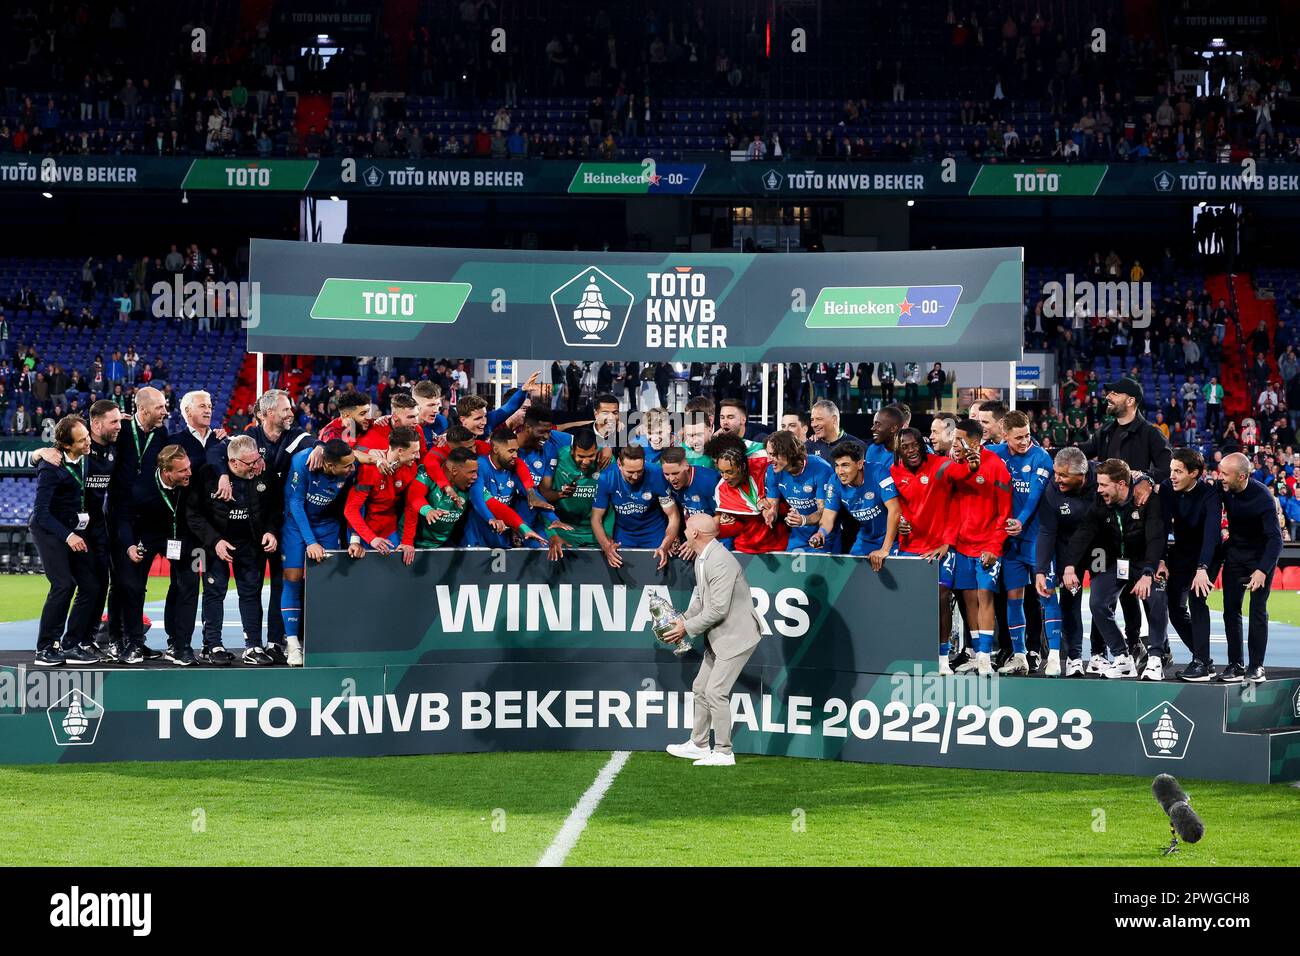 TOTO KNVB Beker, Brands of the World™